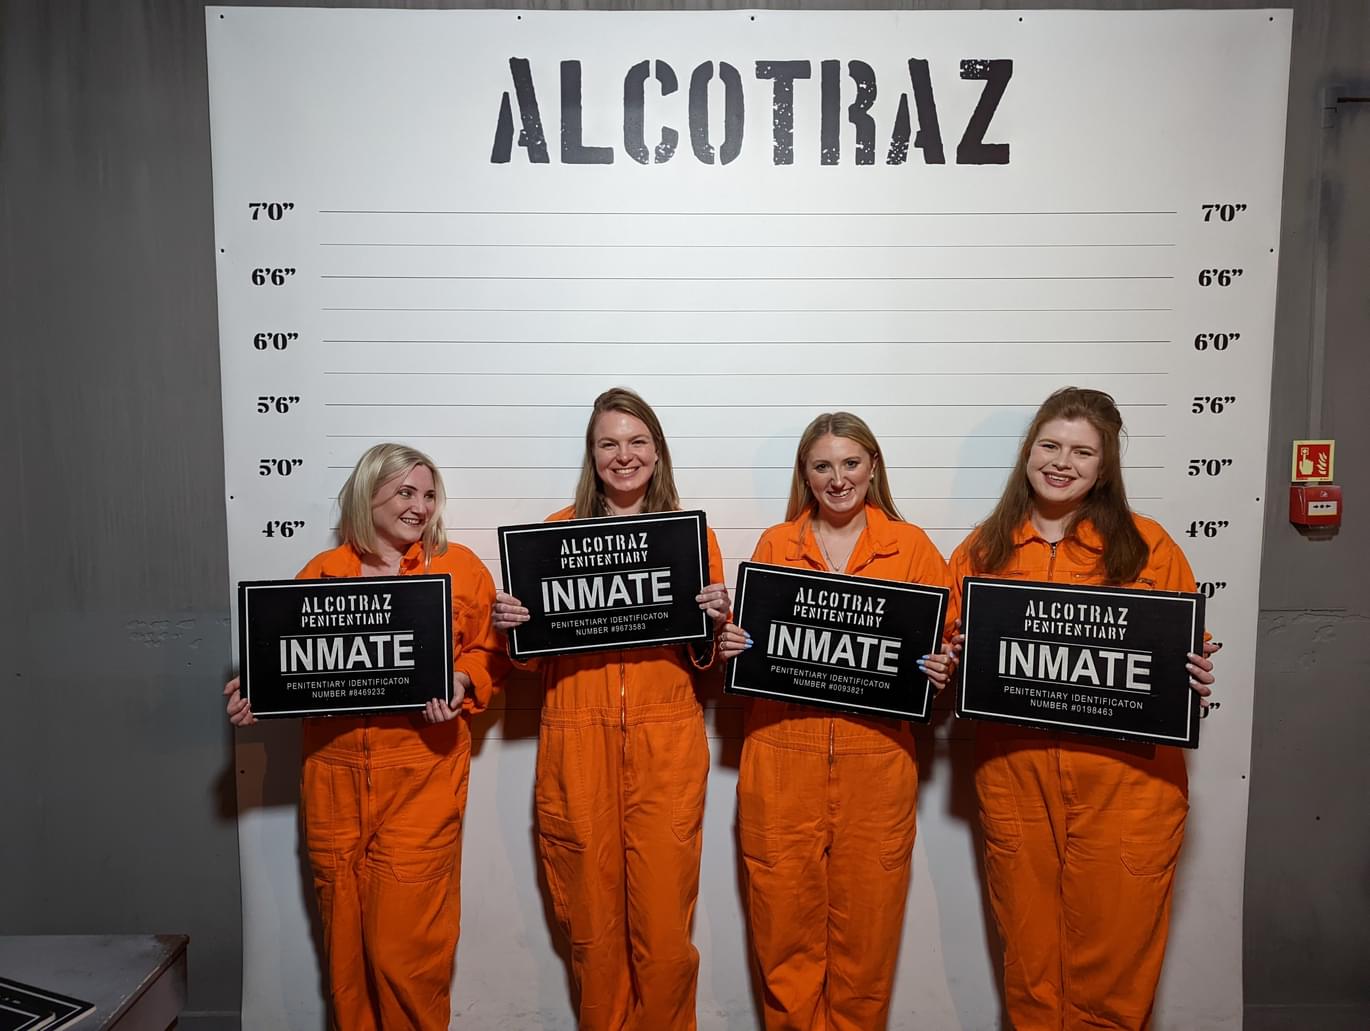 Four women in a line up dressed in orange prison jumpsuits and holding inmate signs.